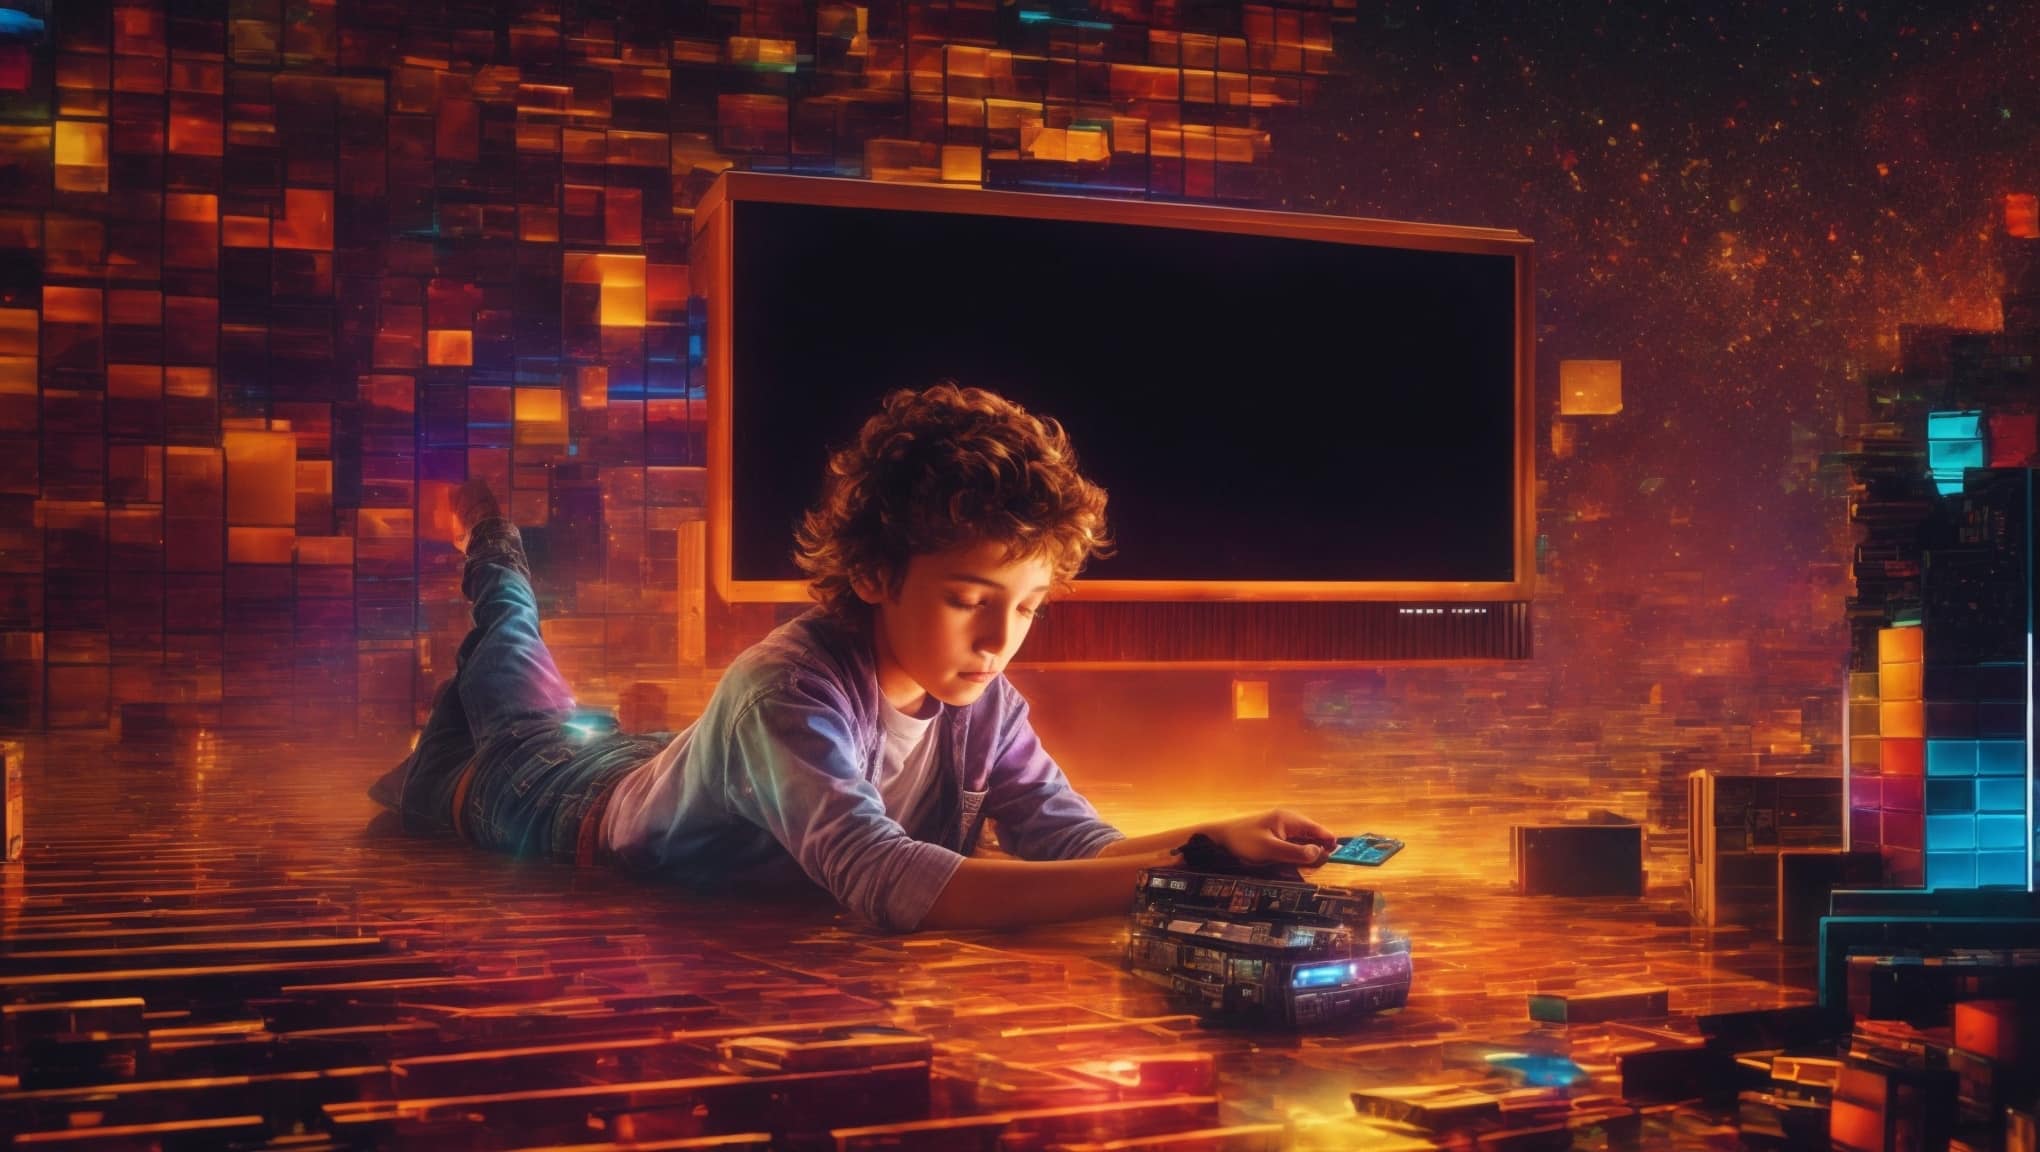 The Phenomenon Continues: 13-year-old Conquers the NES Tetris "Kill Screen" After 34 Years | FinOracle